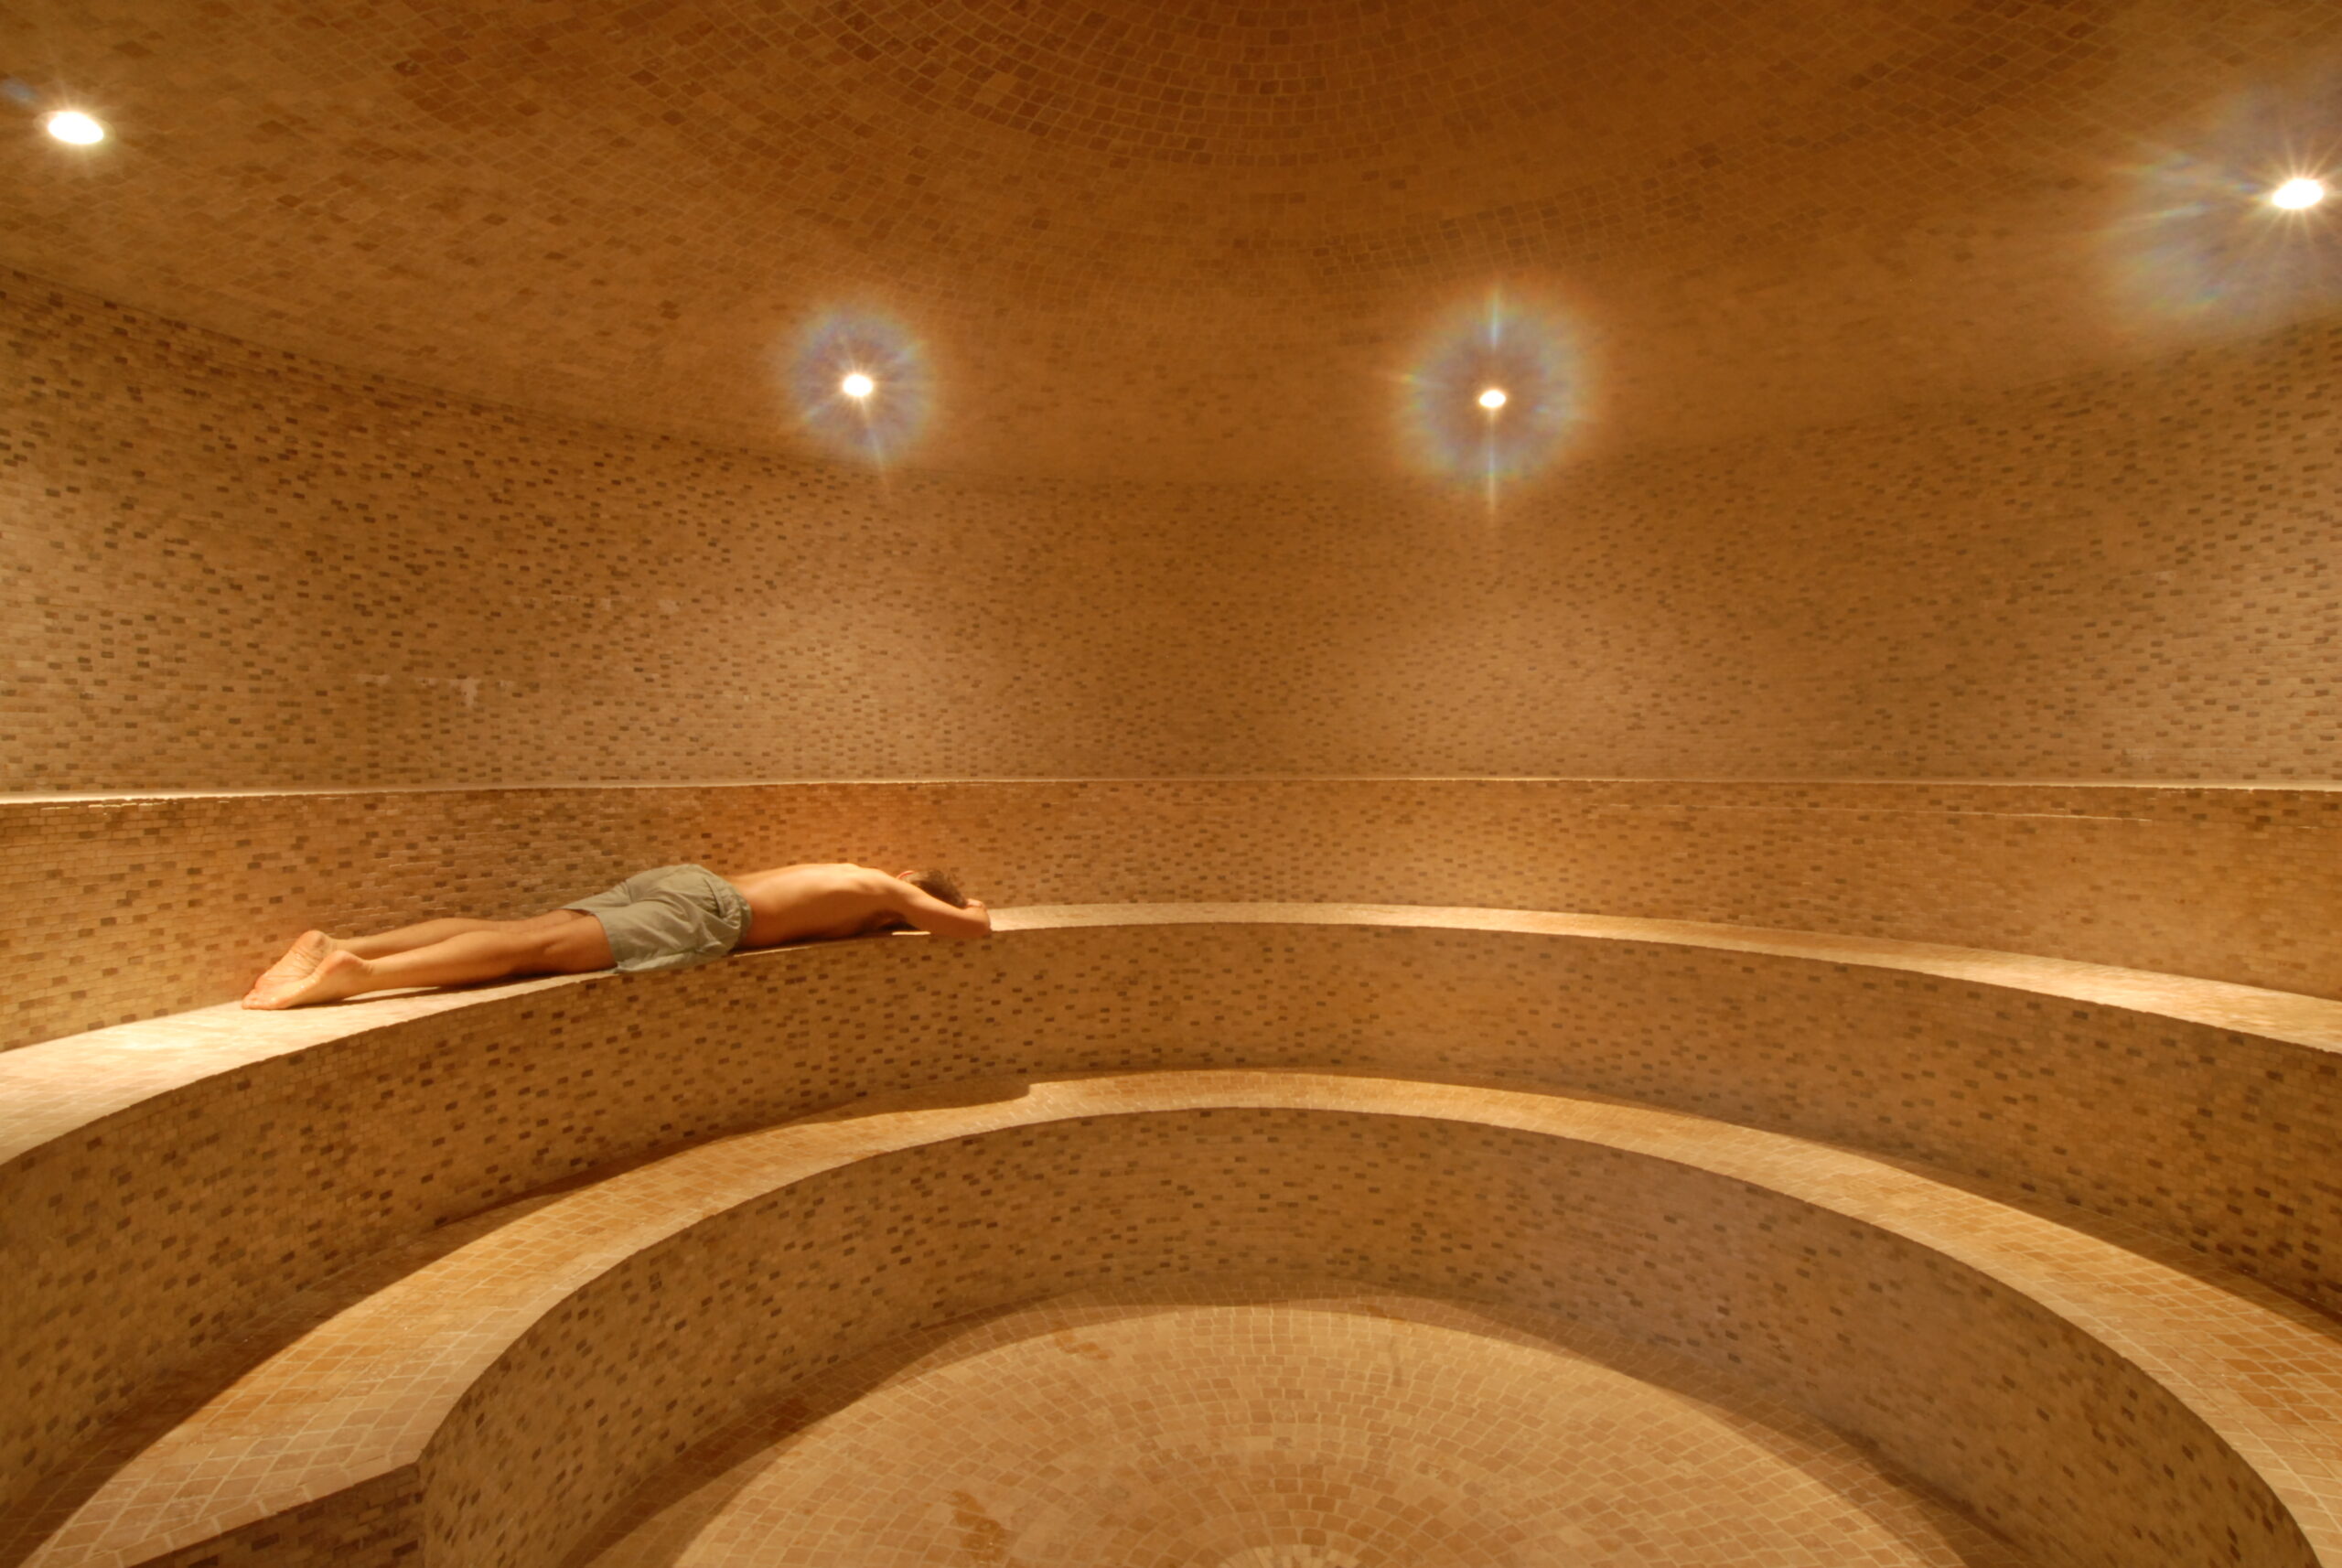 How Much Does a Full Steam Room Cost?